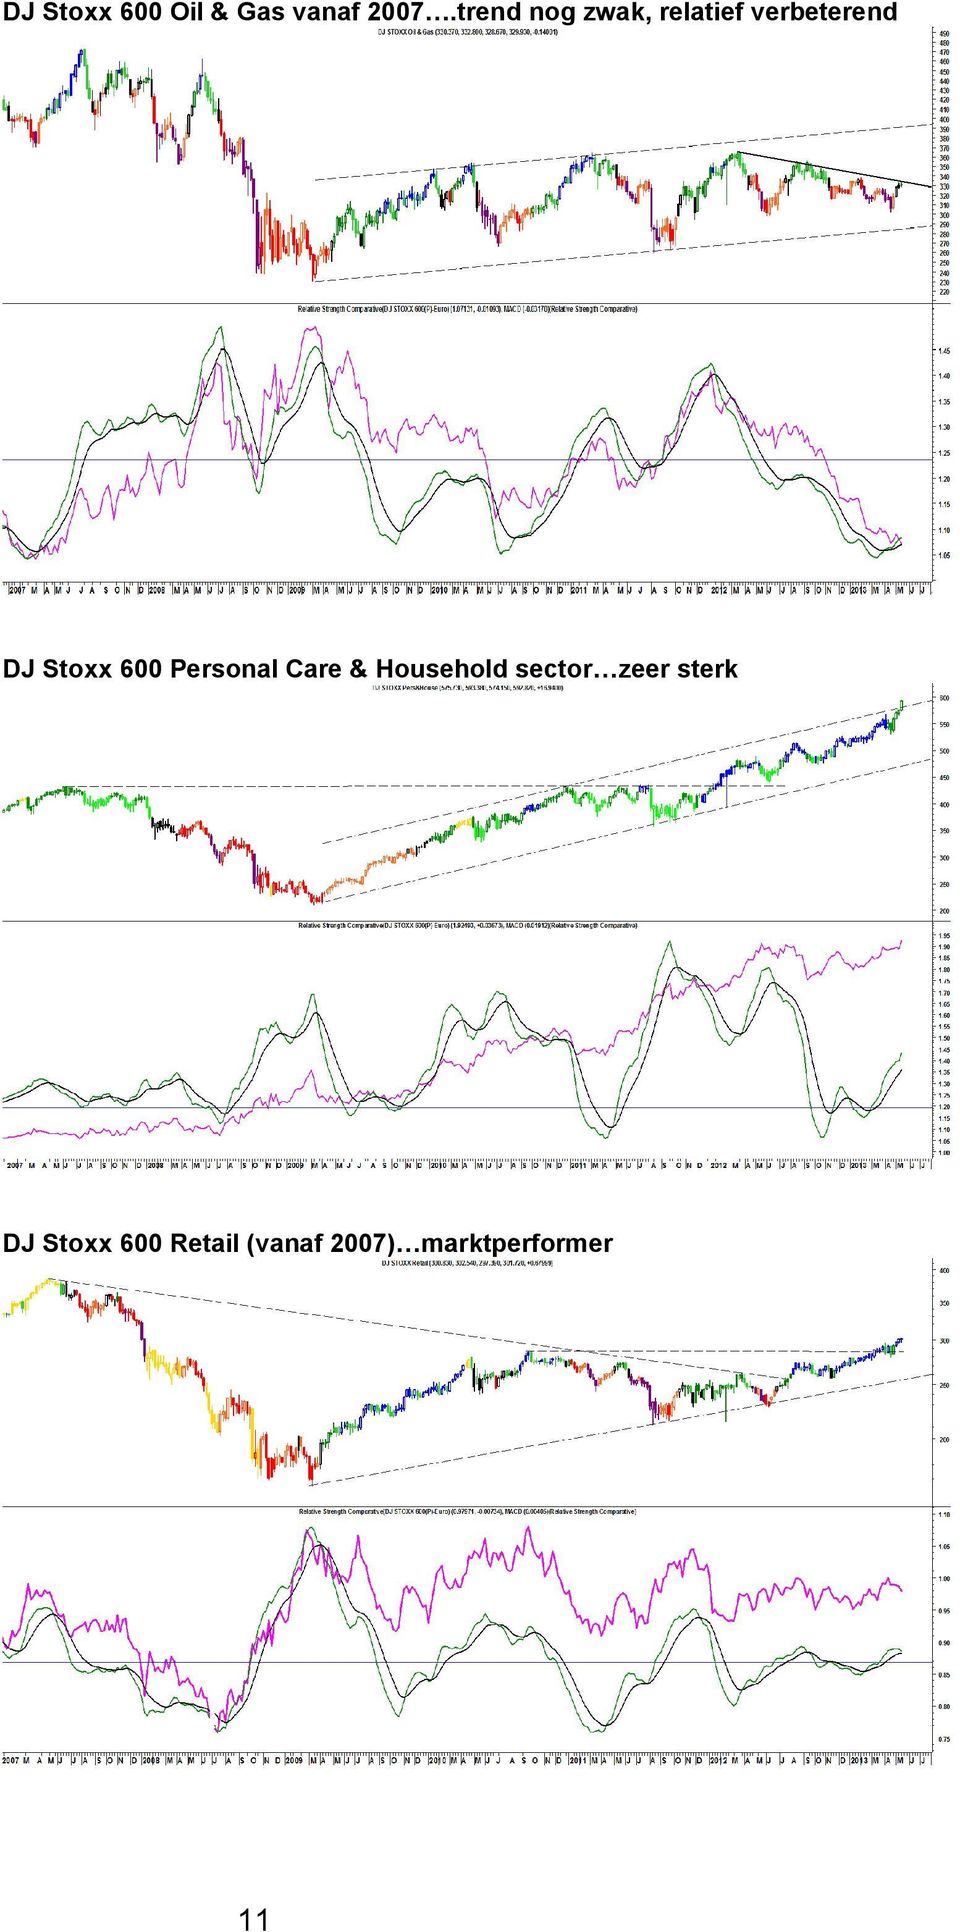 Stoxx 600 Personal Care & Household sector